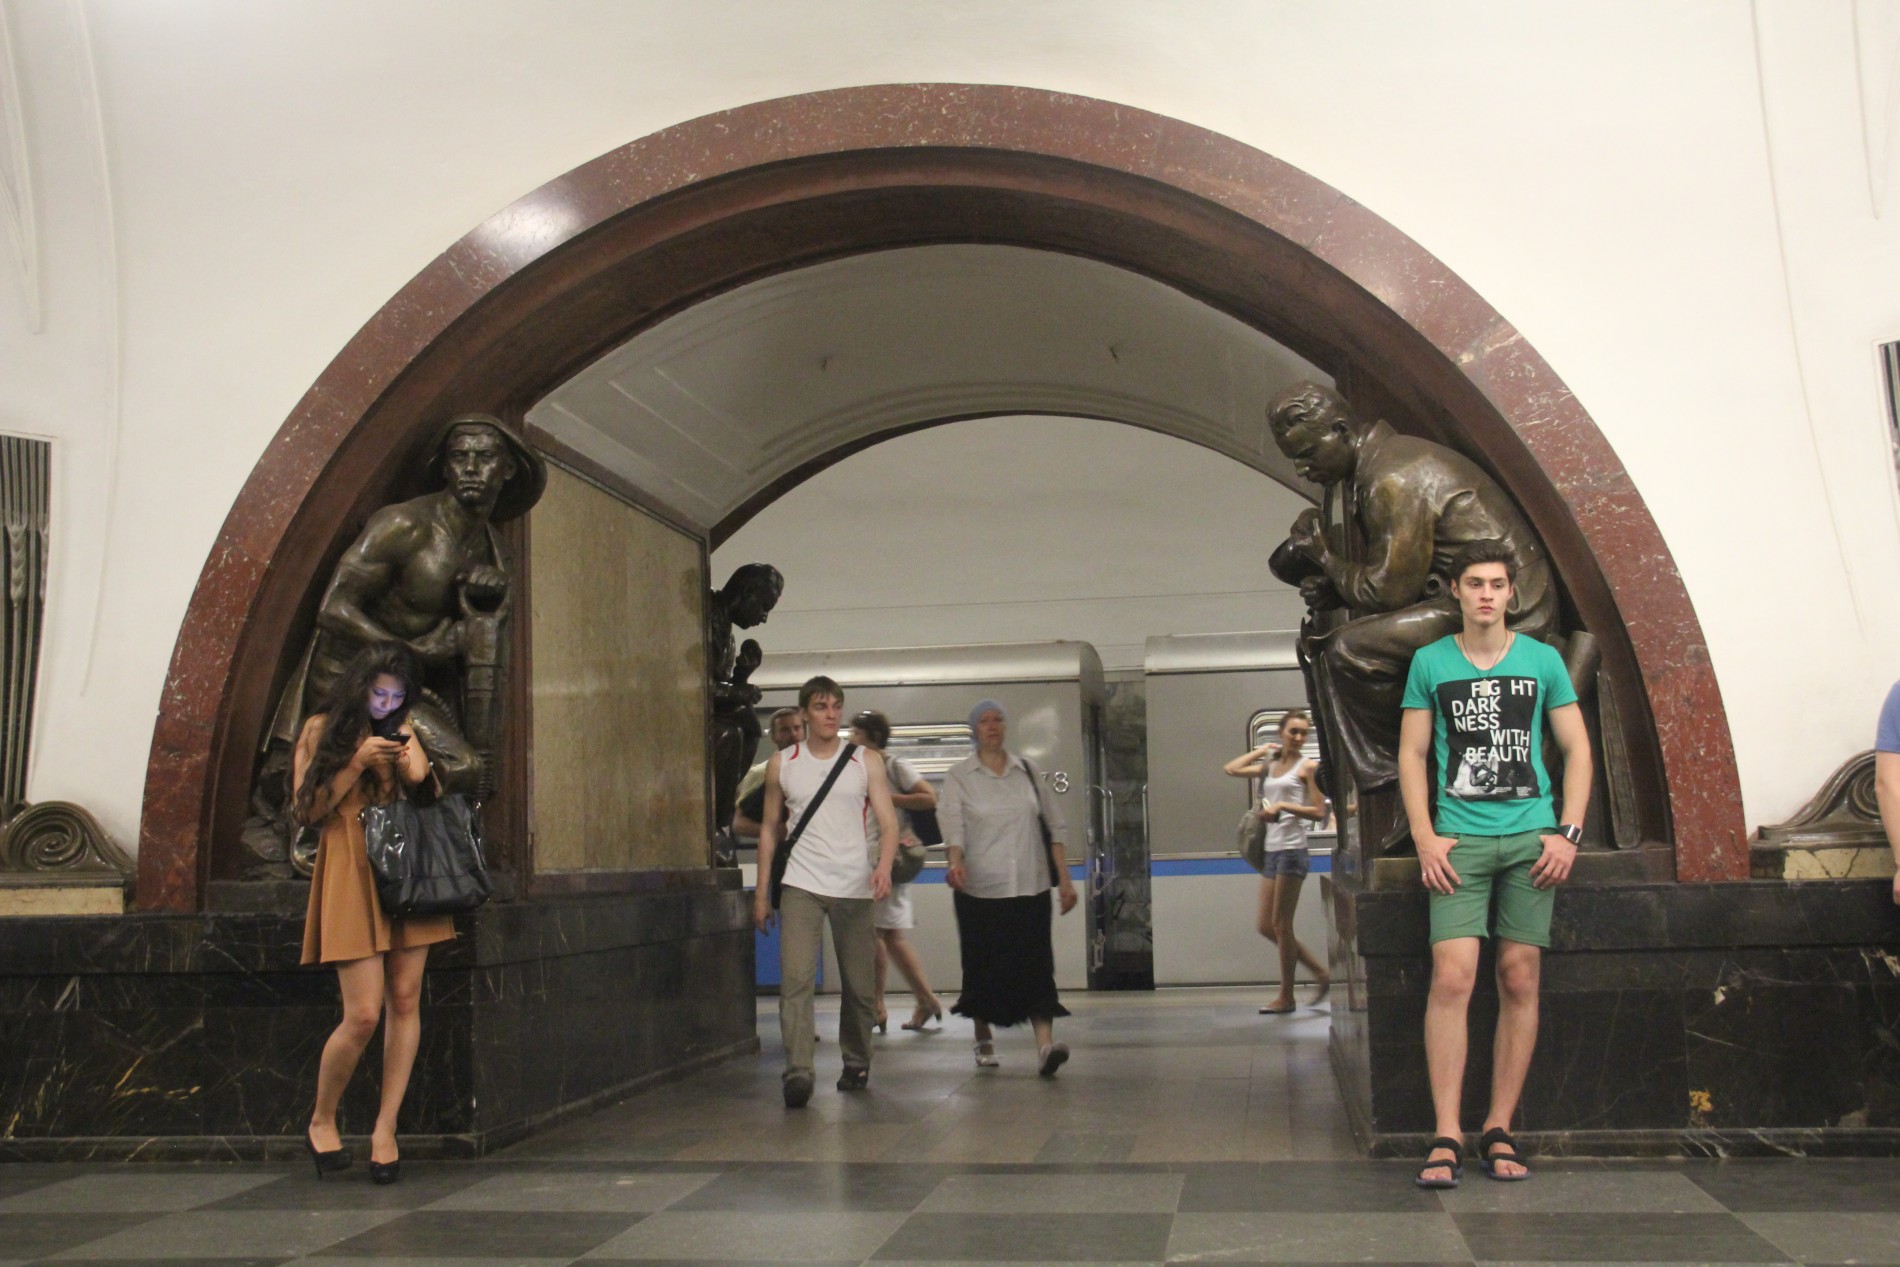 Bronze statues of Russian citizens stand in the Moscow Metro's Ploshchad Revolyutsii Station.